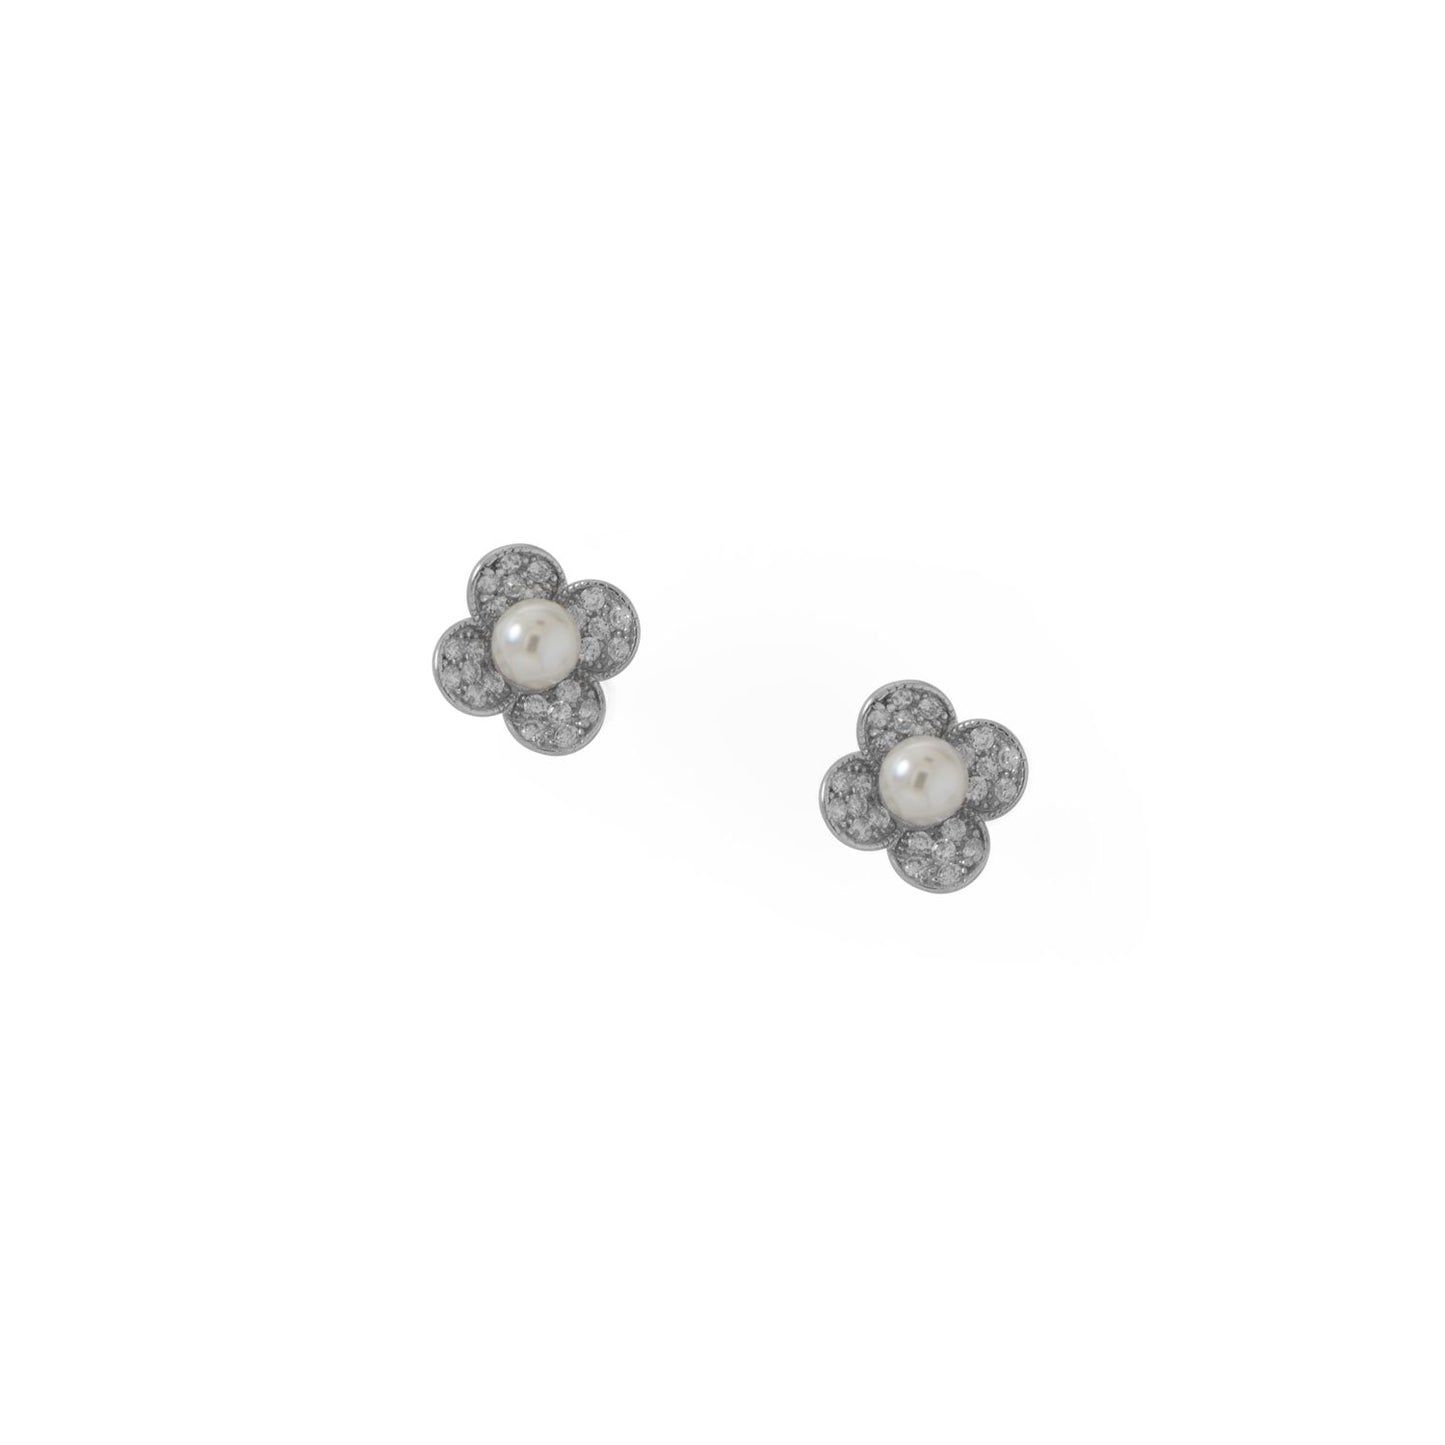 Rhodium Plated Simulated Pearl and Pave CZ Flower Earrings